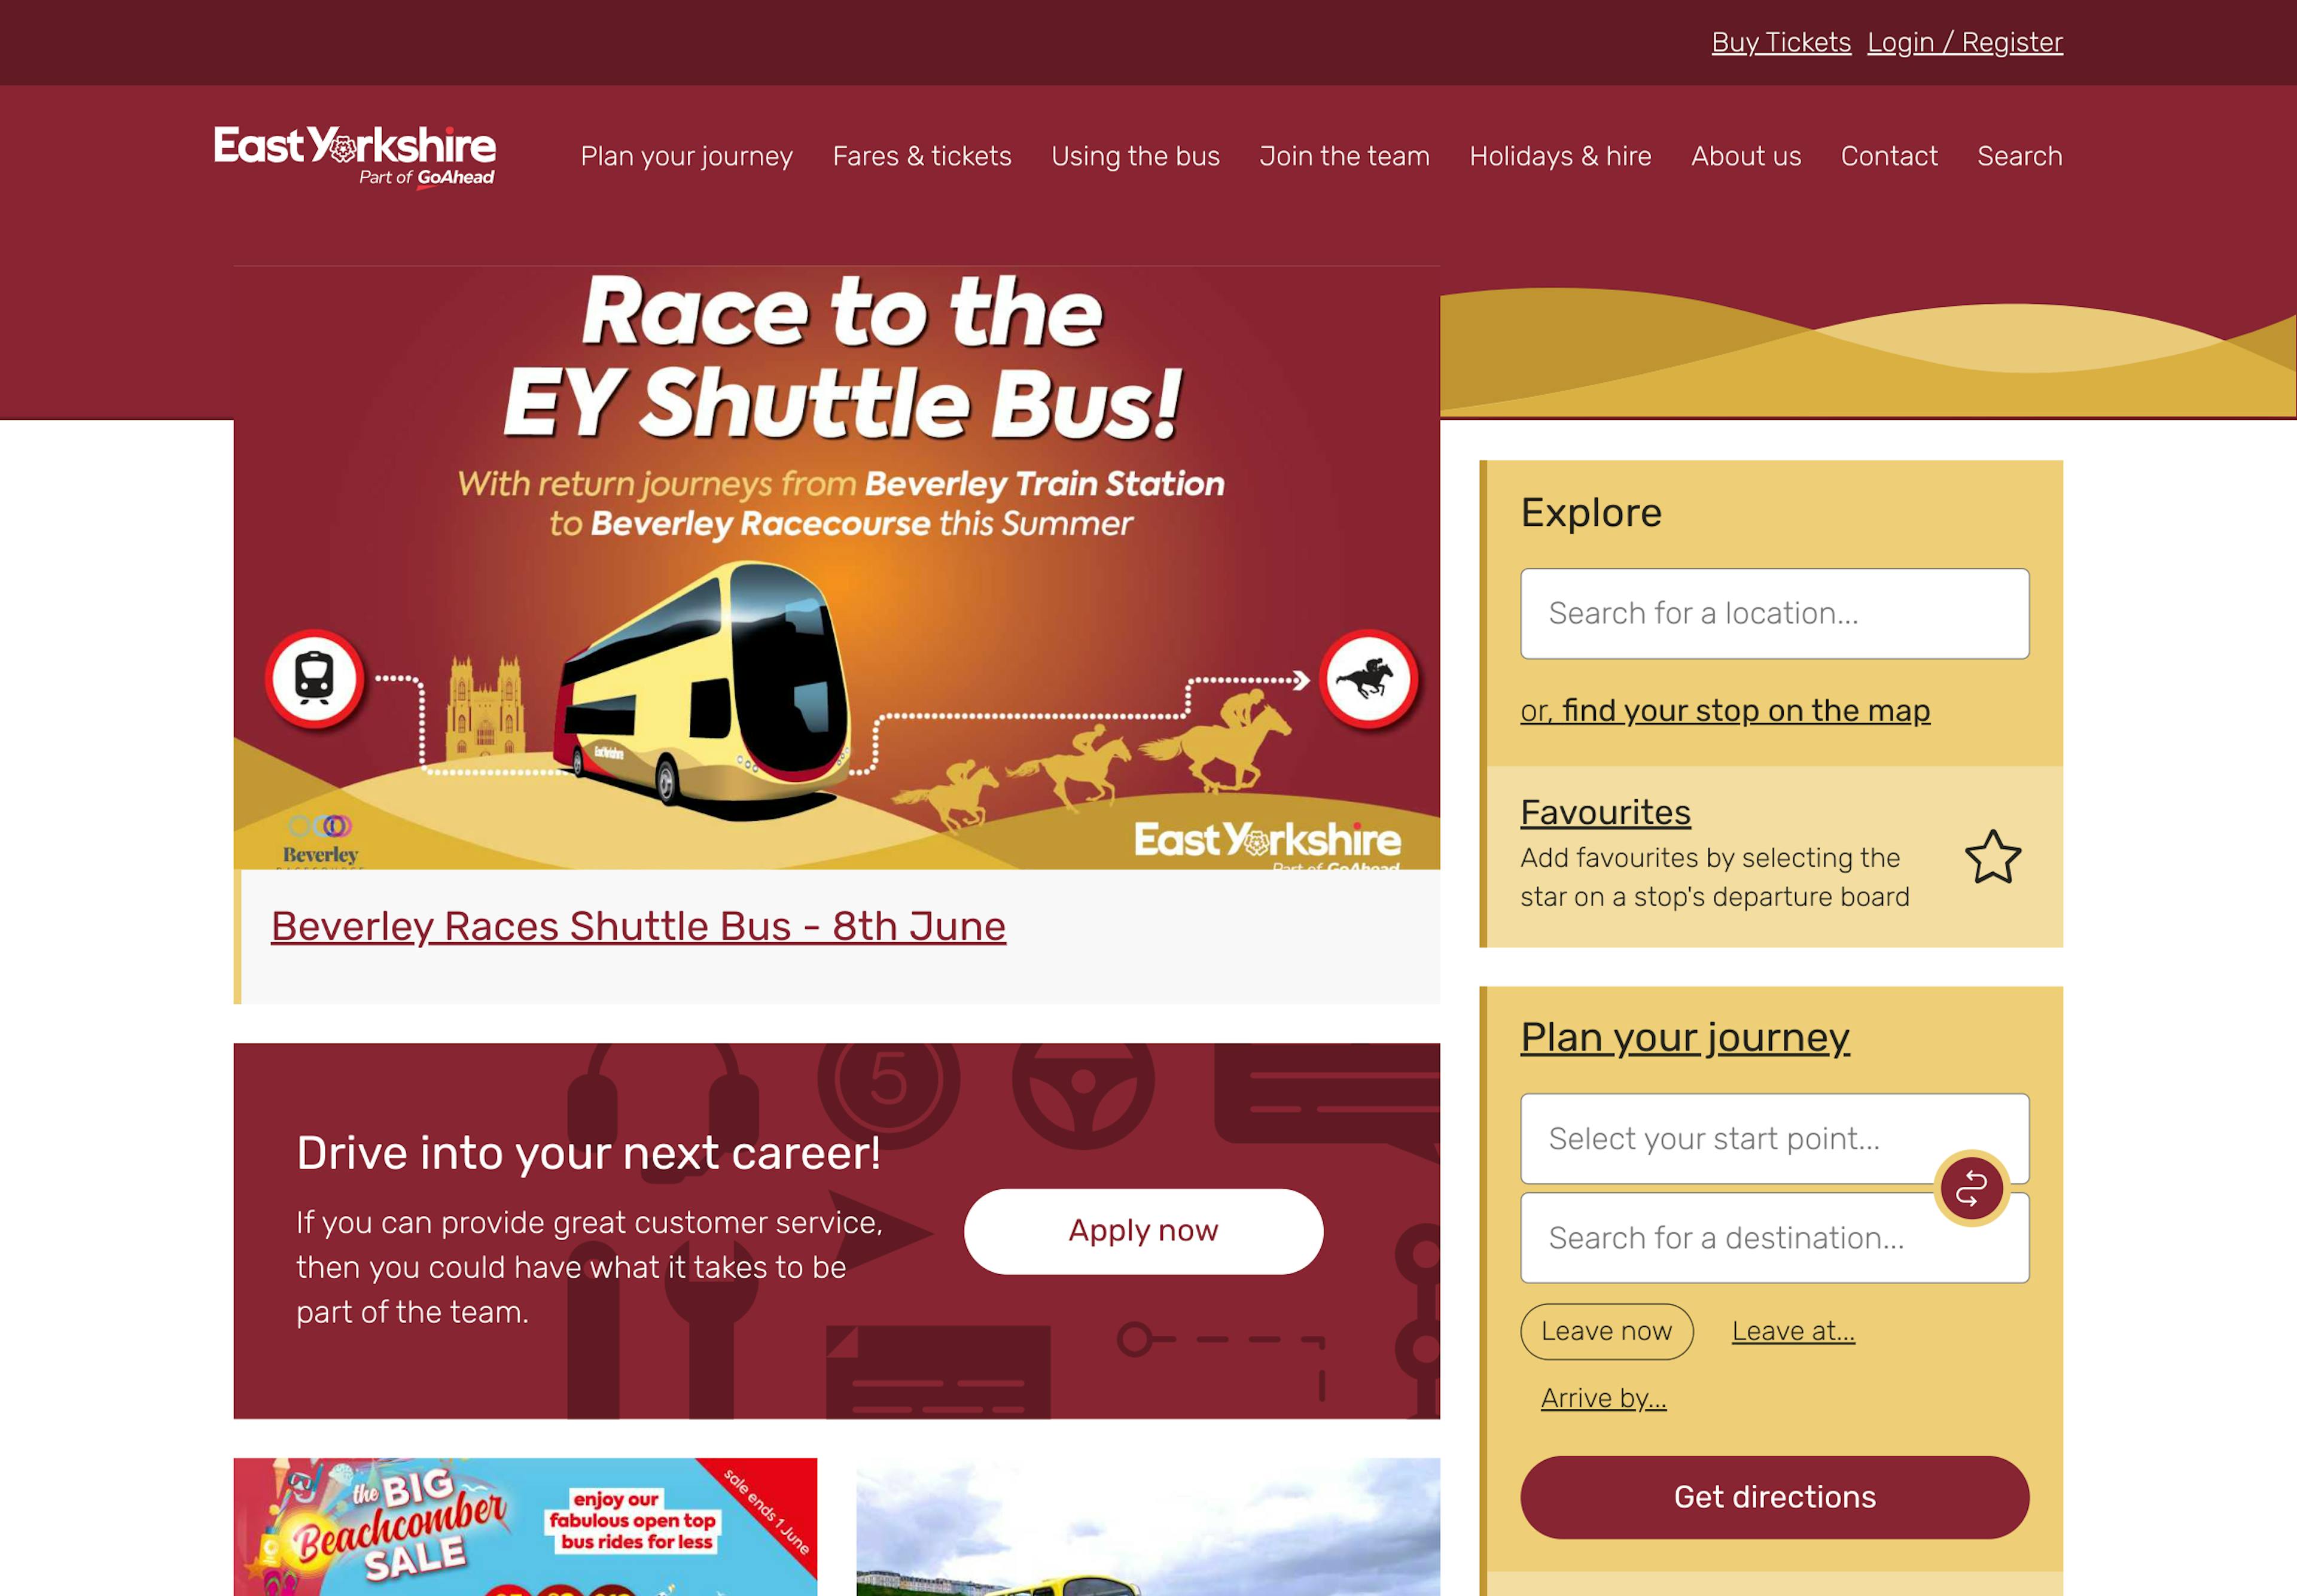 A screenshot of the East Yorkshire Bus homepage